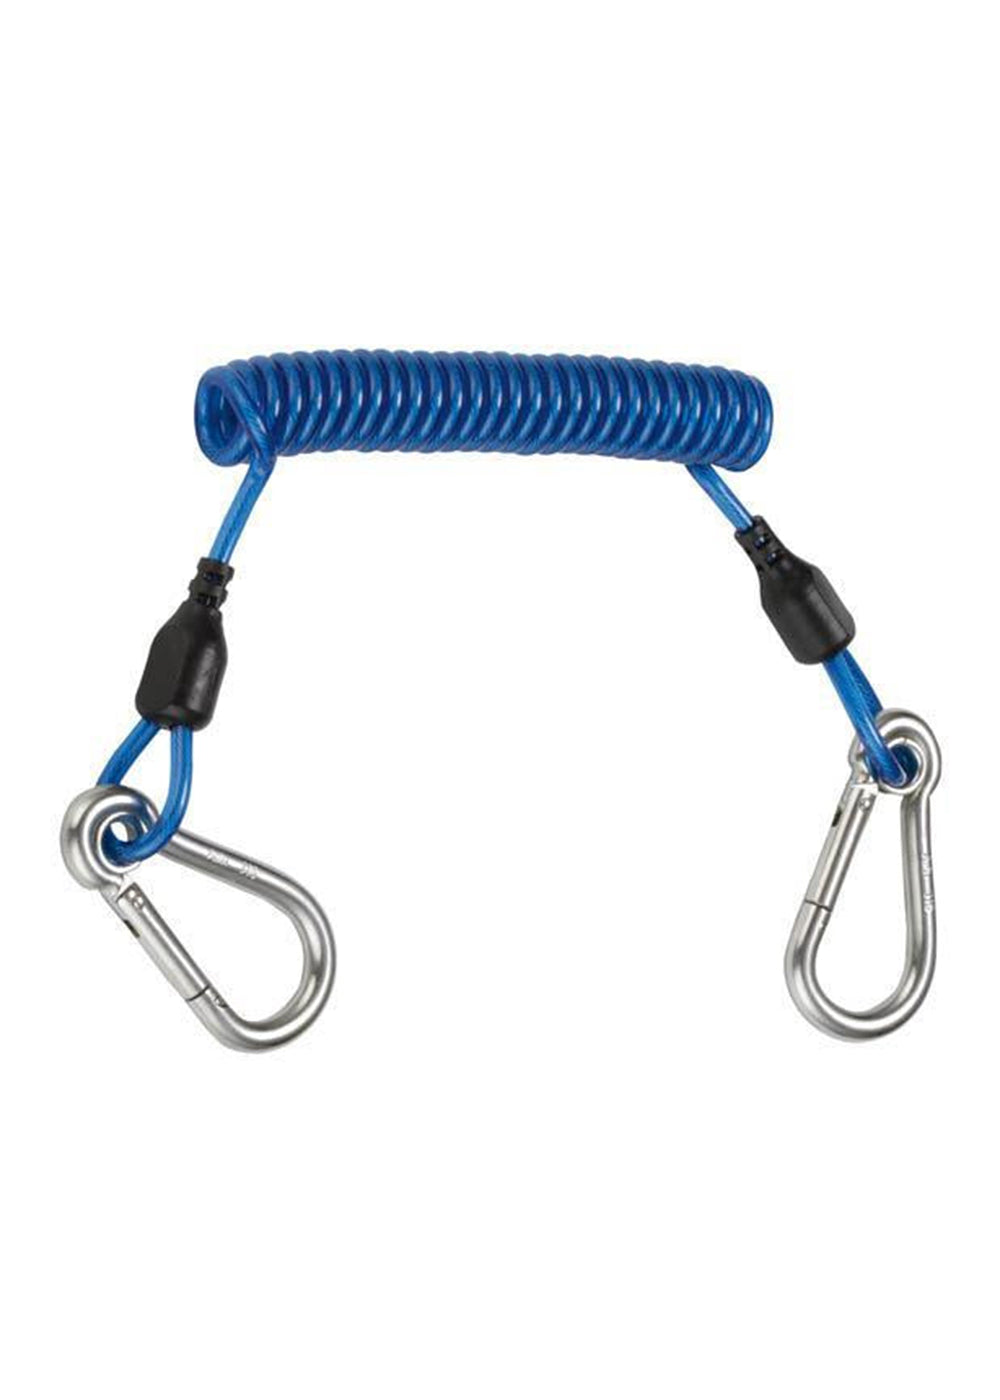 Problue H.D. shockline (wire core) double end SS Carabiner - Blue